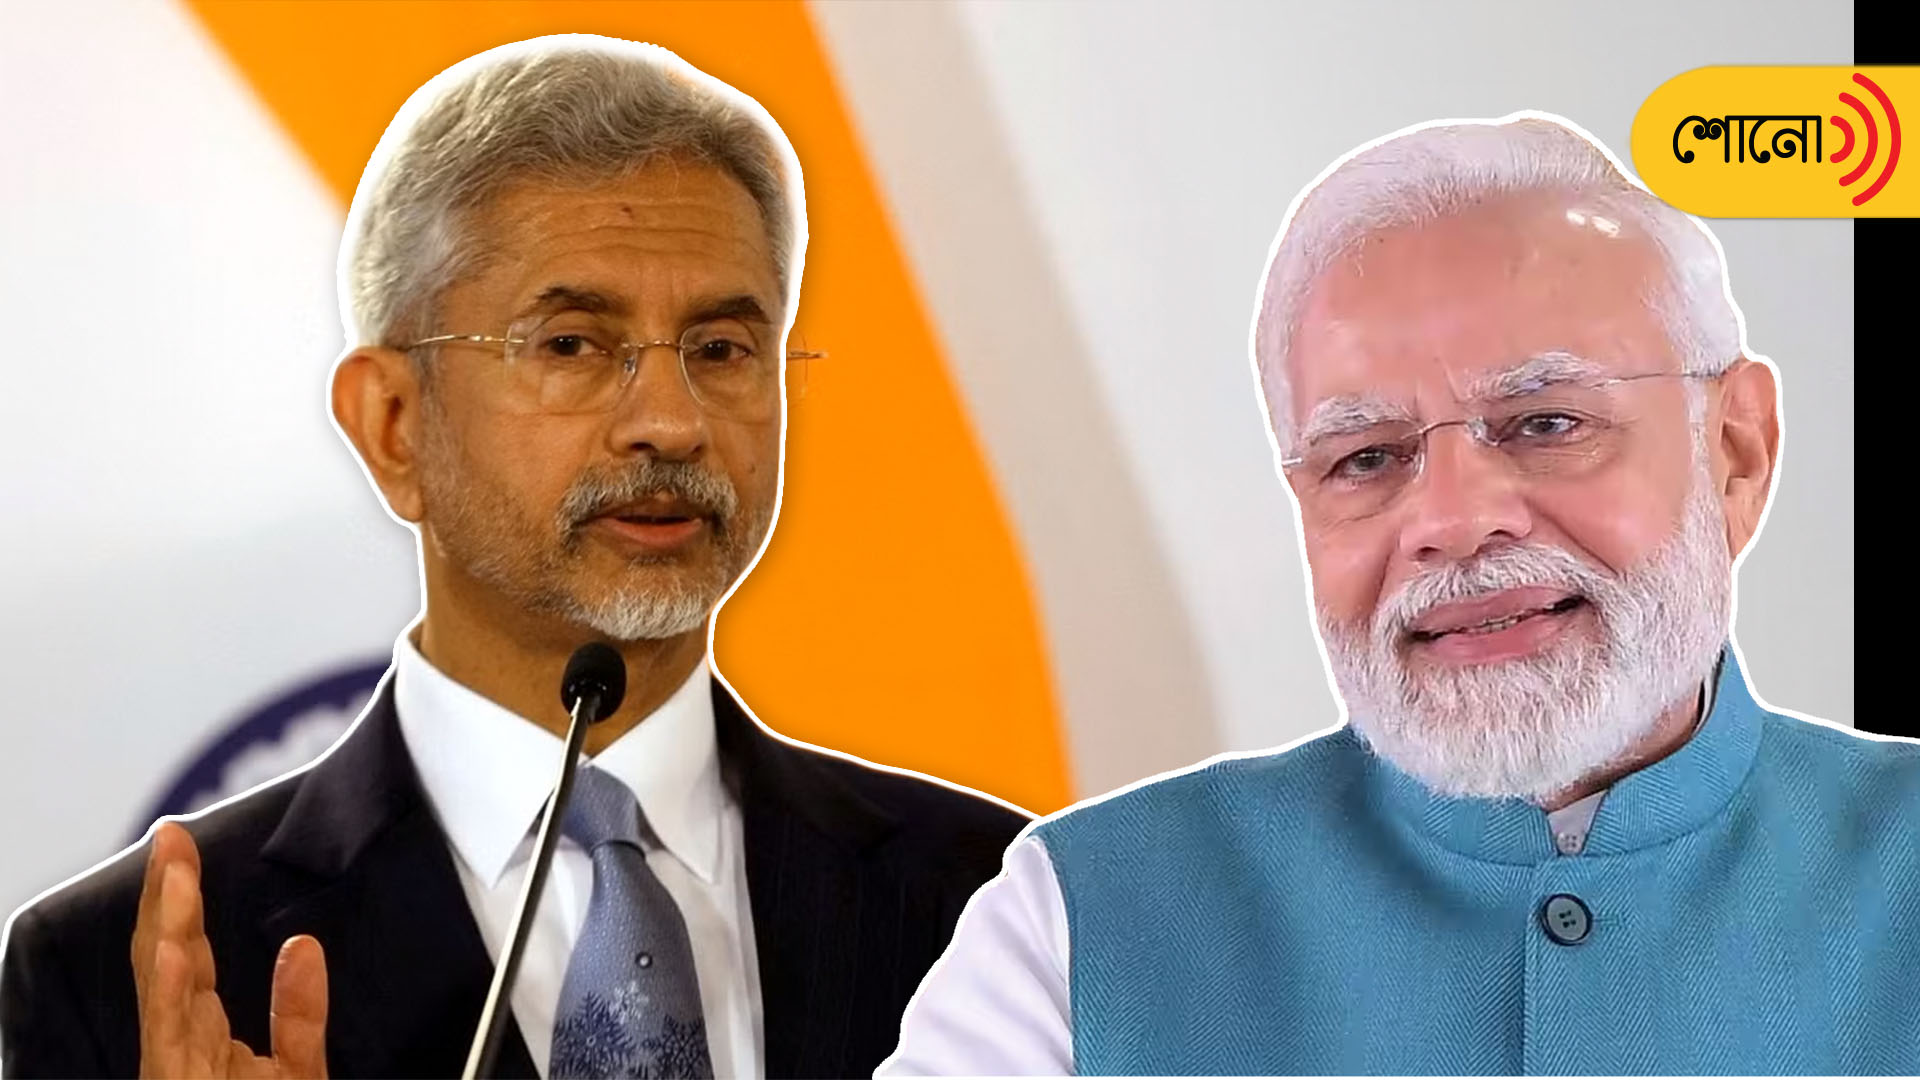 S Jaishankar has attributed significant changes in India to Narendra Modi